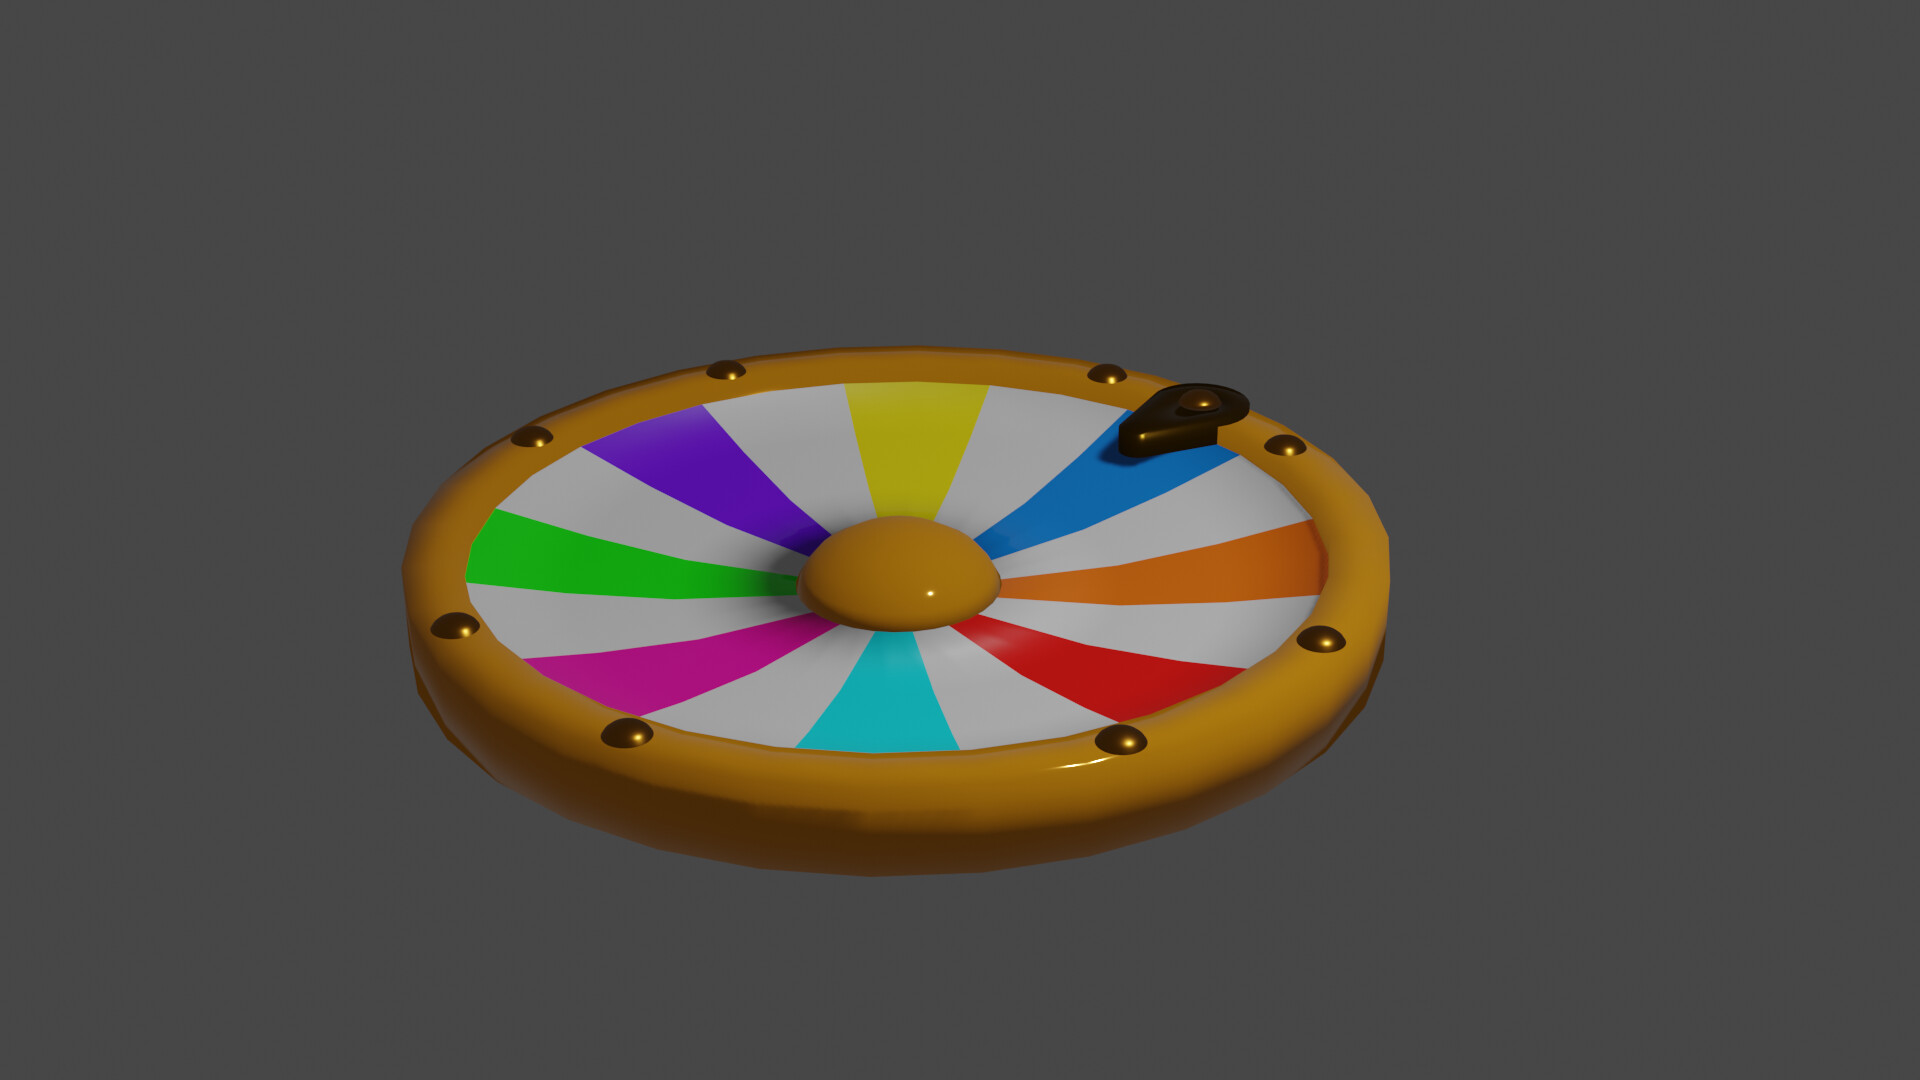 ArtStation - Spin Wheel with Slices - Spin and Win